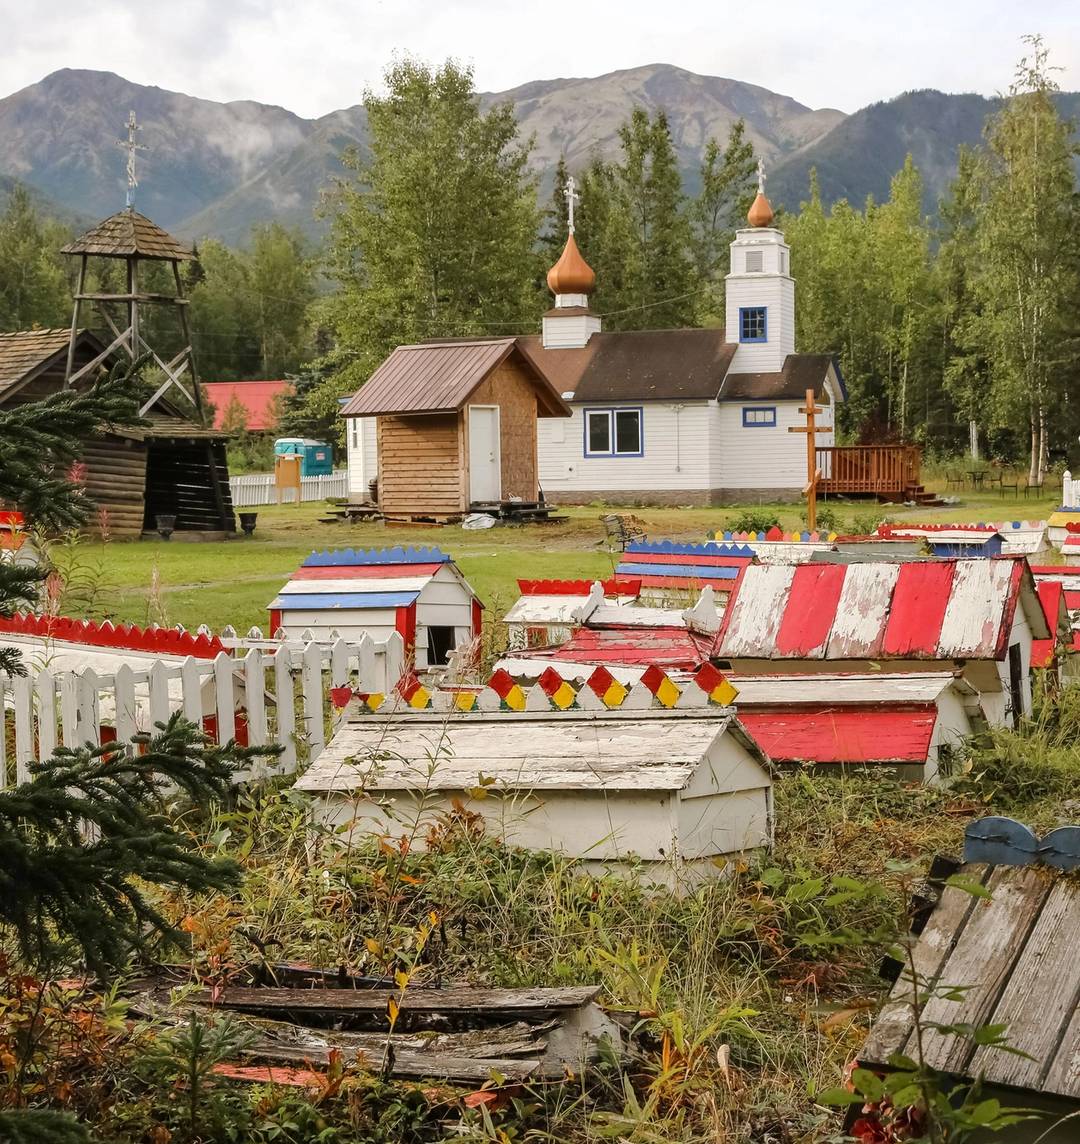 The cemetery at Old St. Nicholas Church in Eklutna. The grave markers, known as spirit houses, are meant to provide a site for the deceased to retrace the steps of their life before they can pass on to eternity.